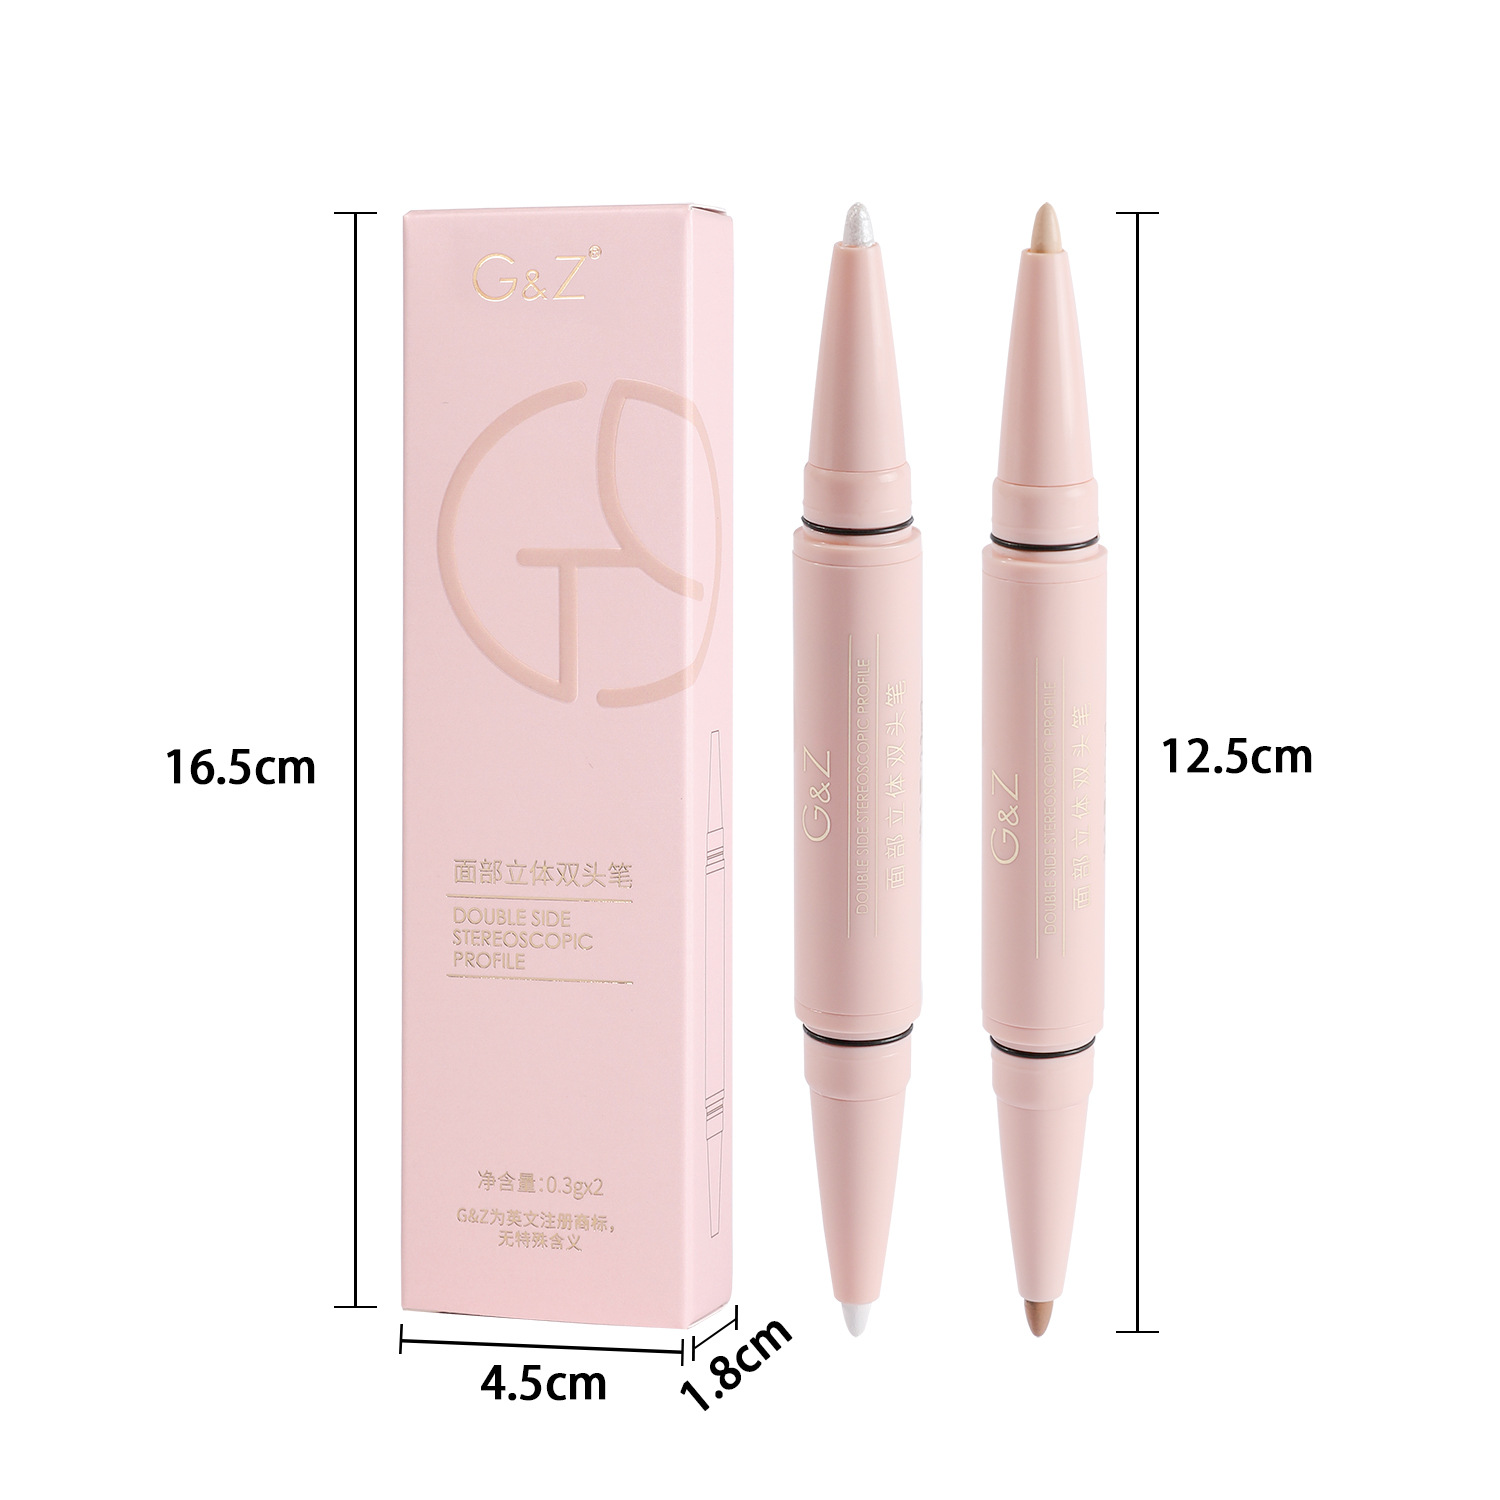 G & Z Facial Stereo Double-Headed Pen Highlight Contour Stick Matte Double-Headed Pen Shadow Nose Shadow Face Brightening Crouching Silkworm Female